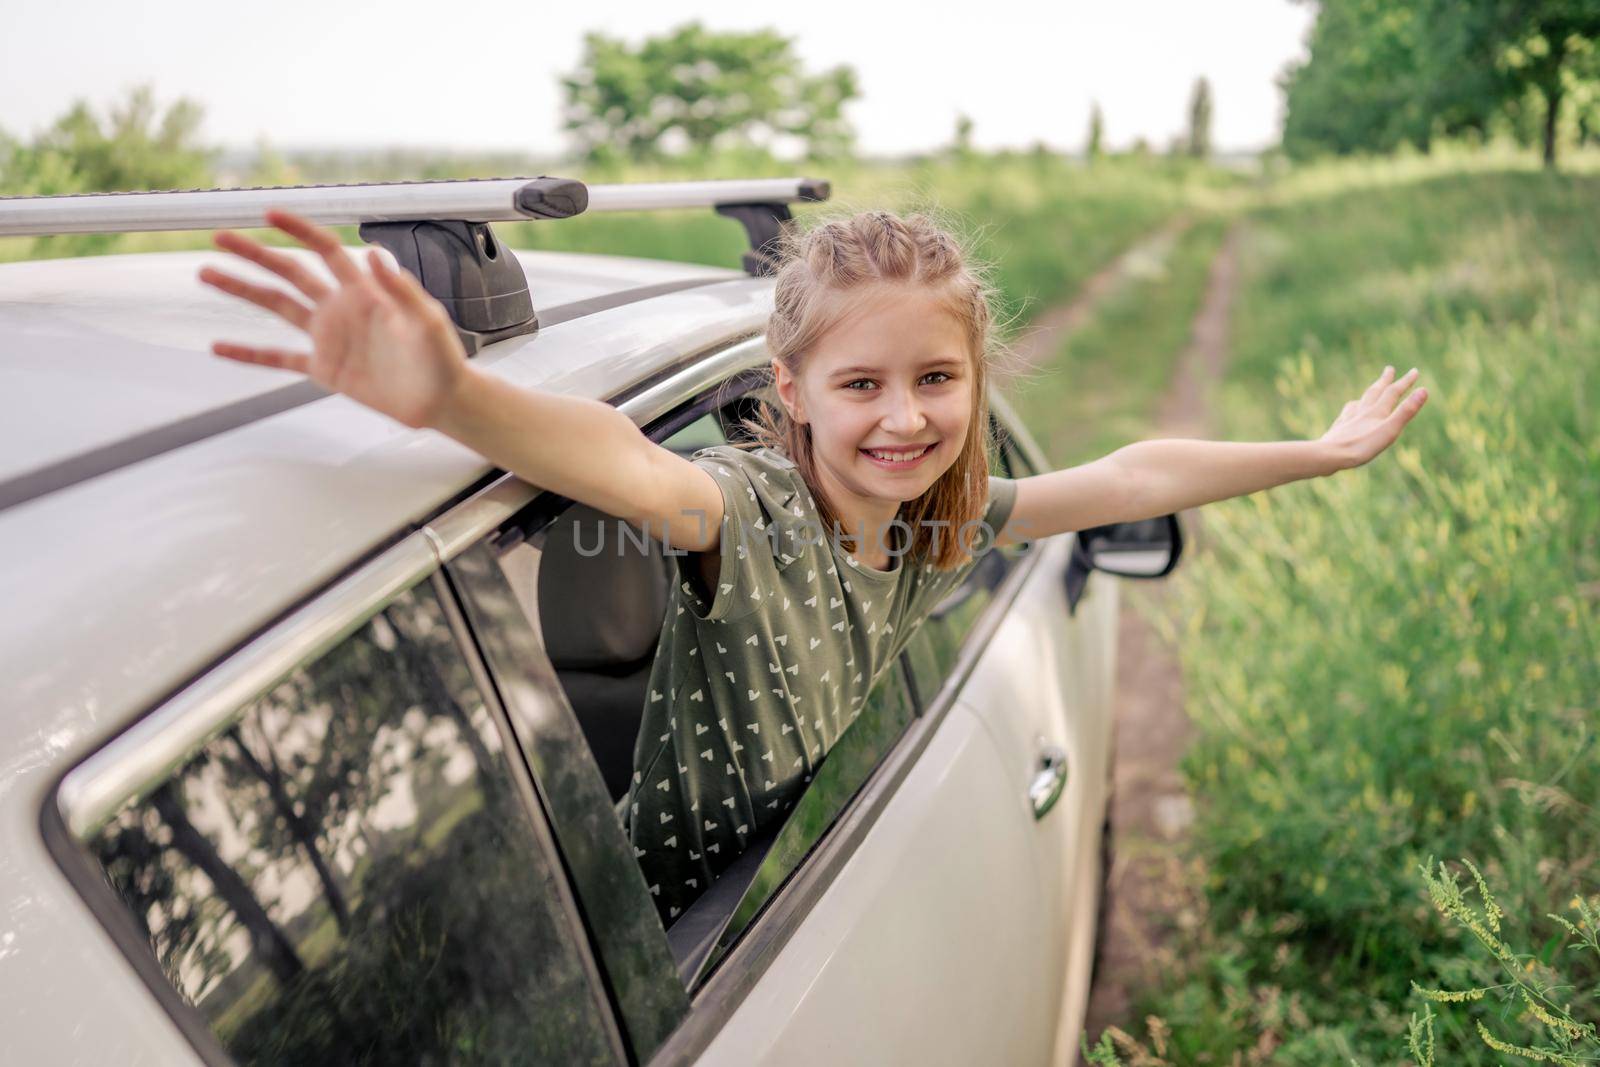 Beautiful preteen girl sitting in the car and looking out the window open, smiling and holding hands up in the field. Happy child kid in the vehicle outdoors during summer journey